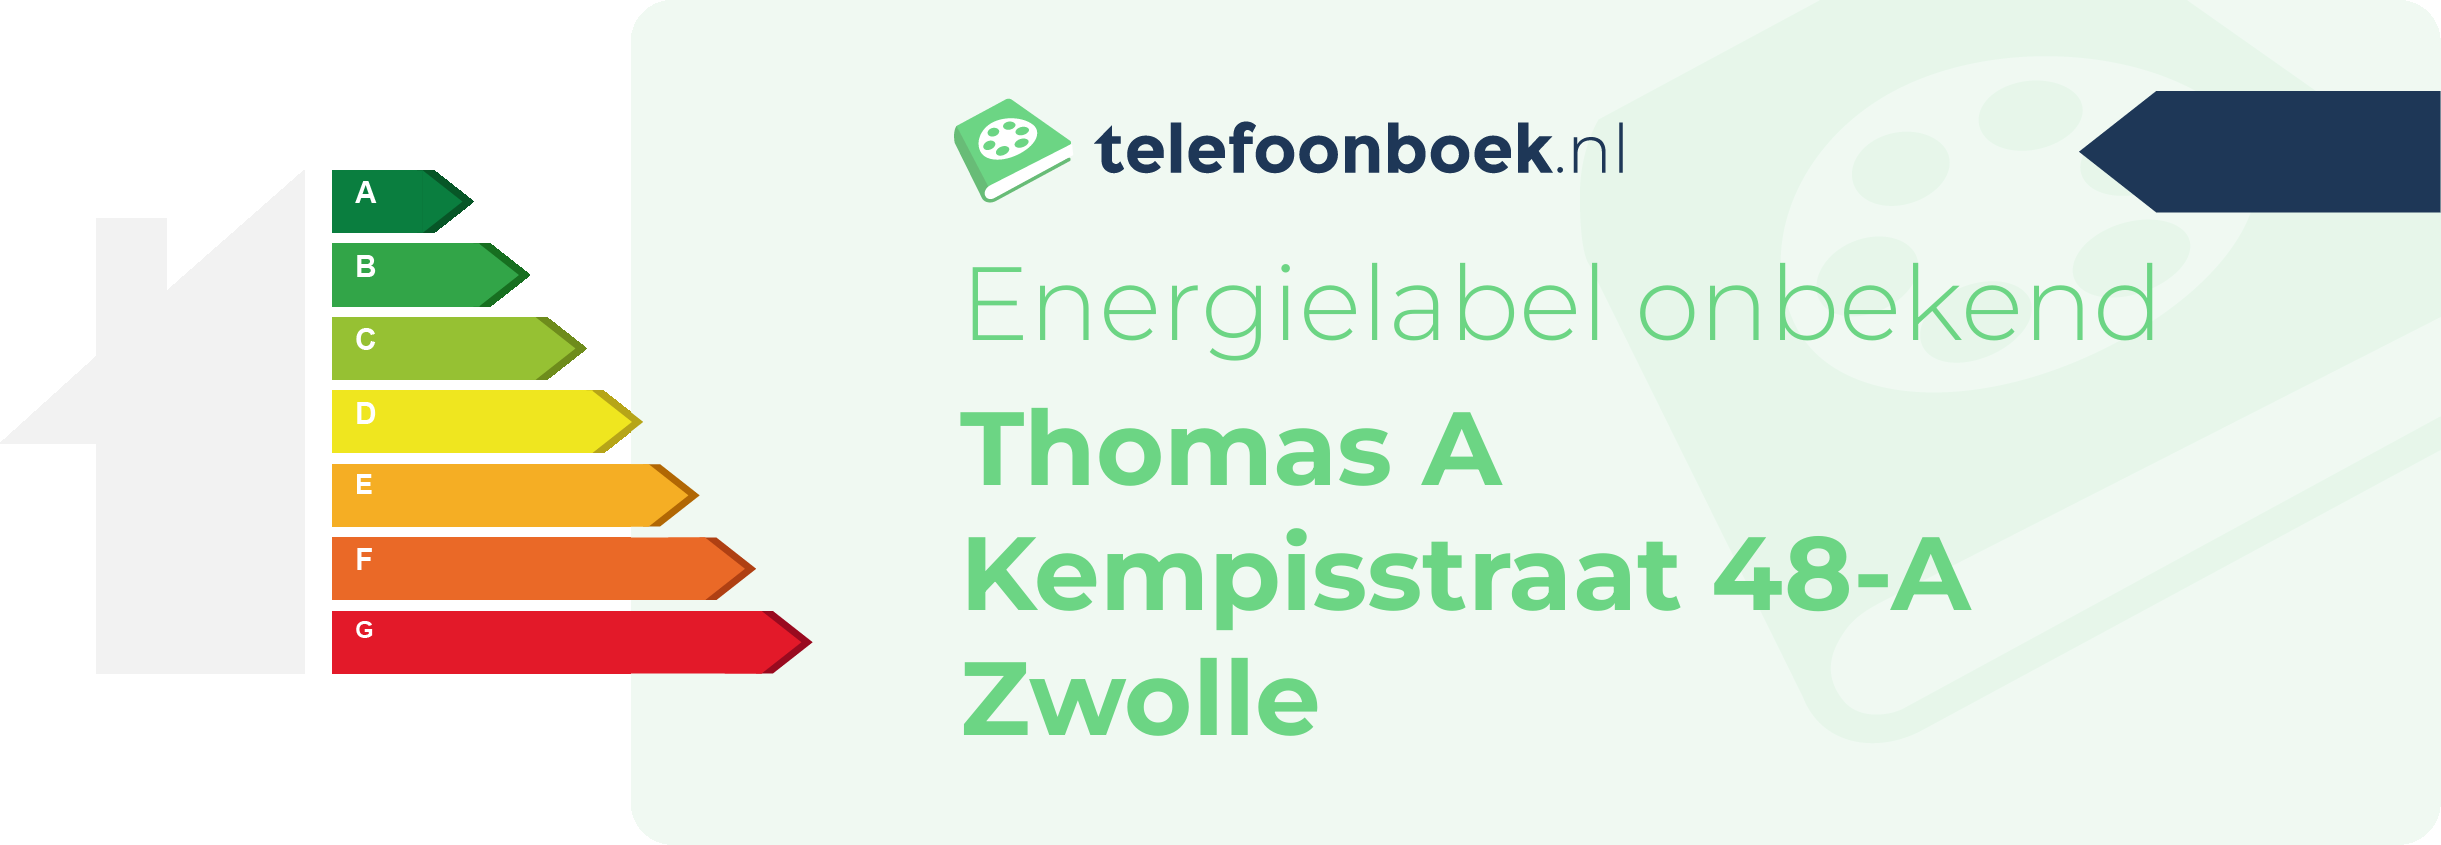 Energielabel Thomas A Kempisstraat 48-A Zwolle